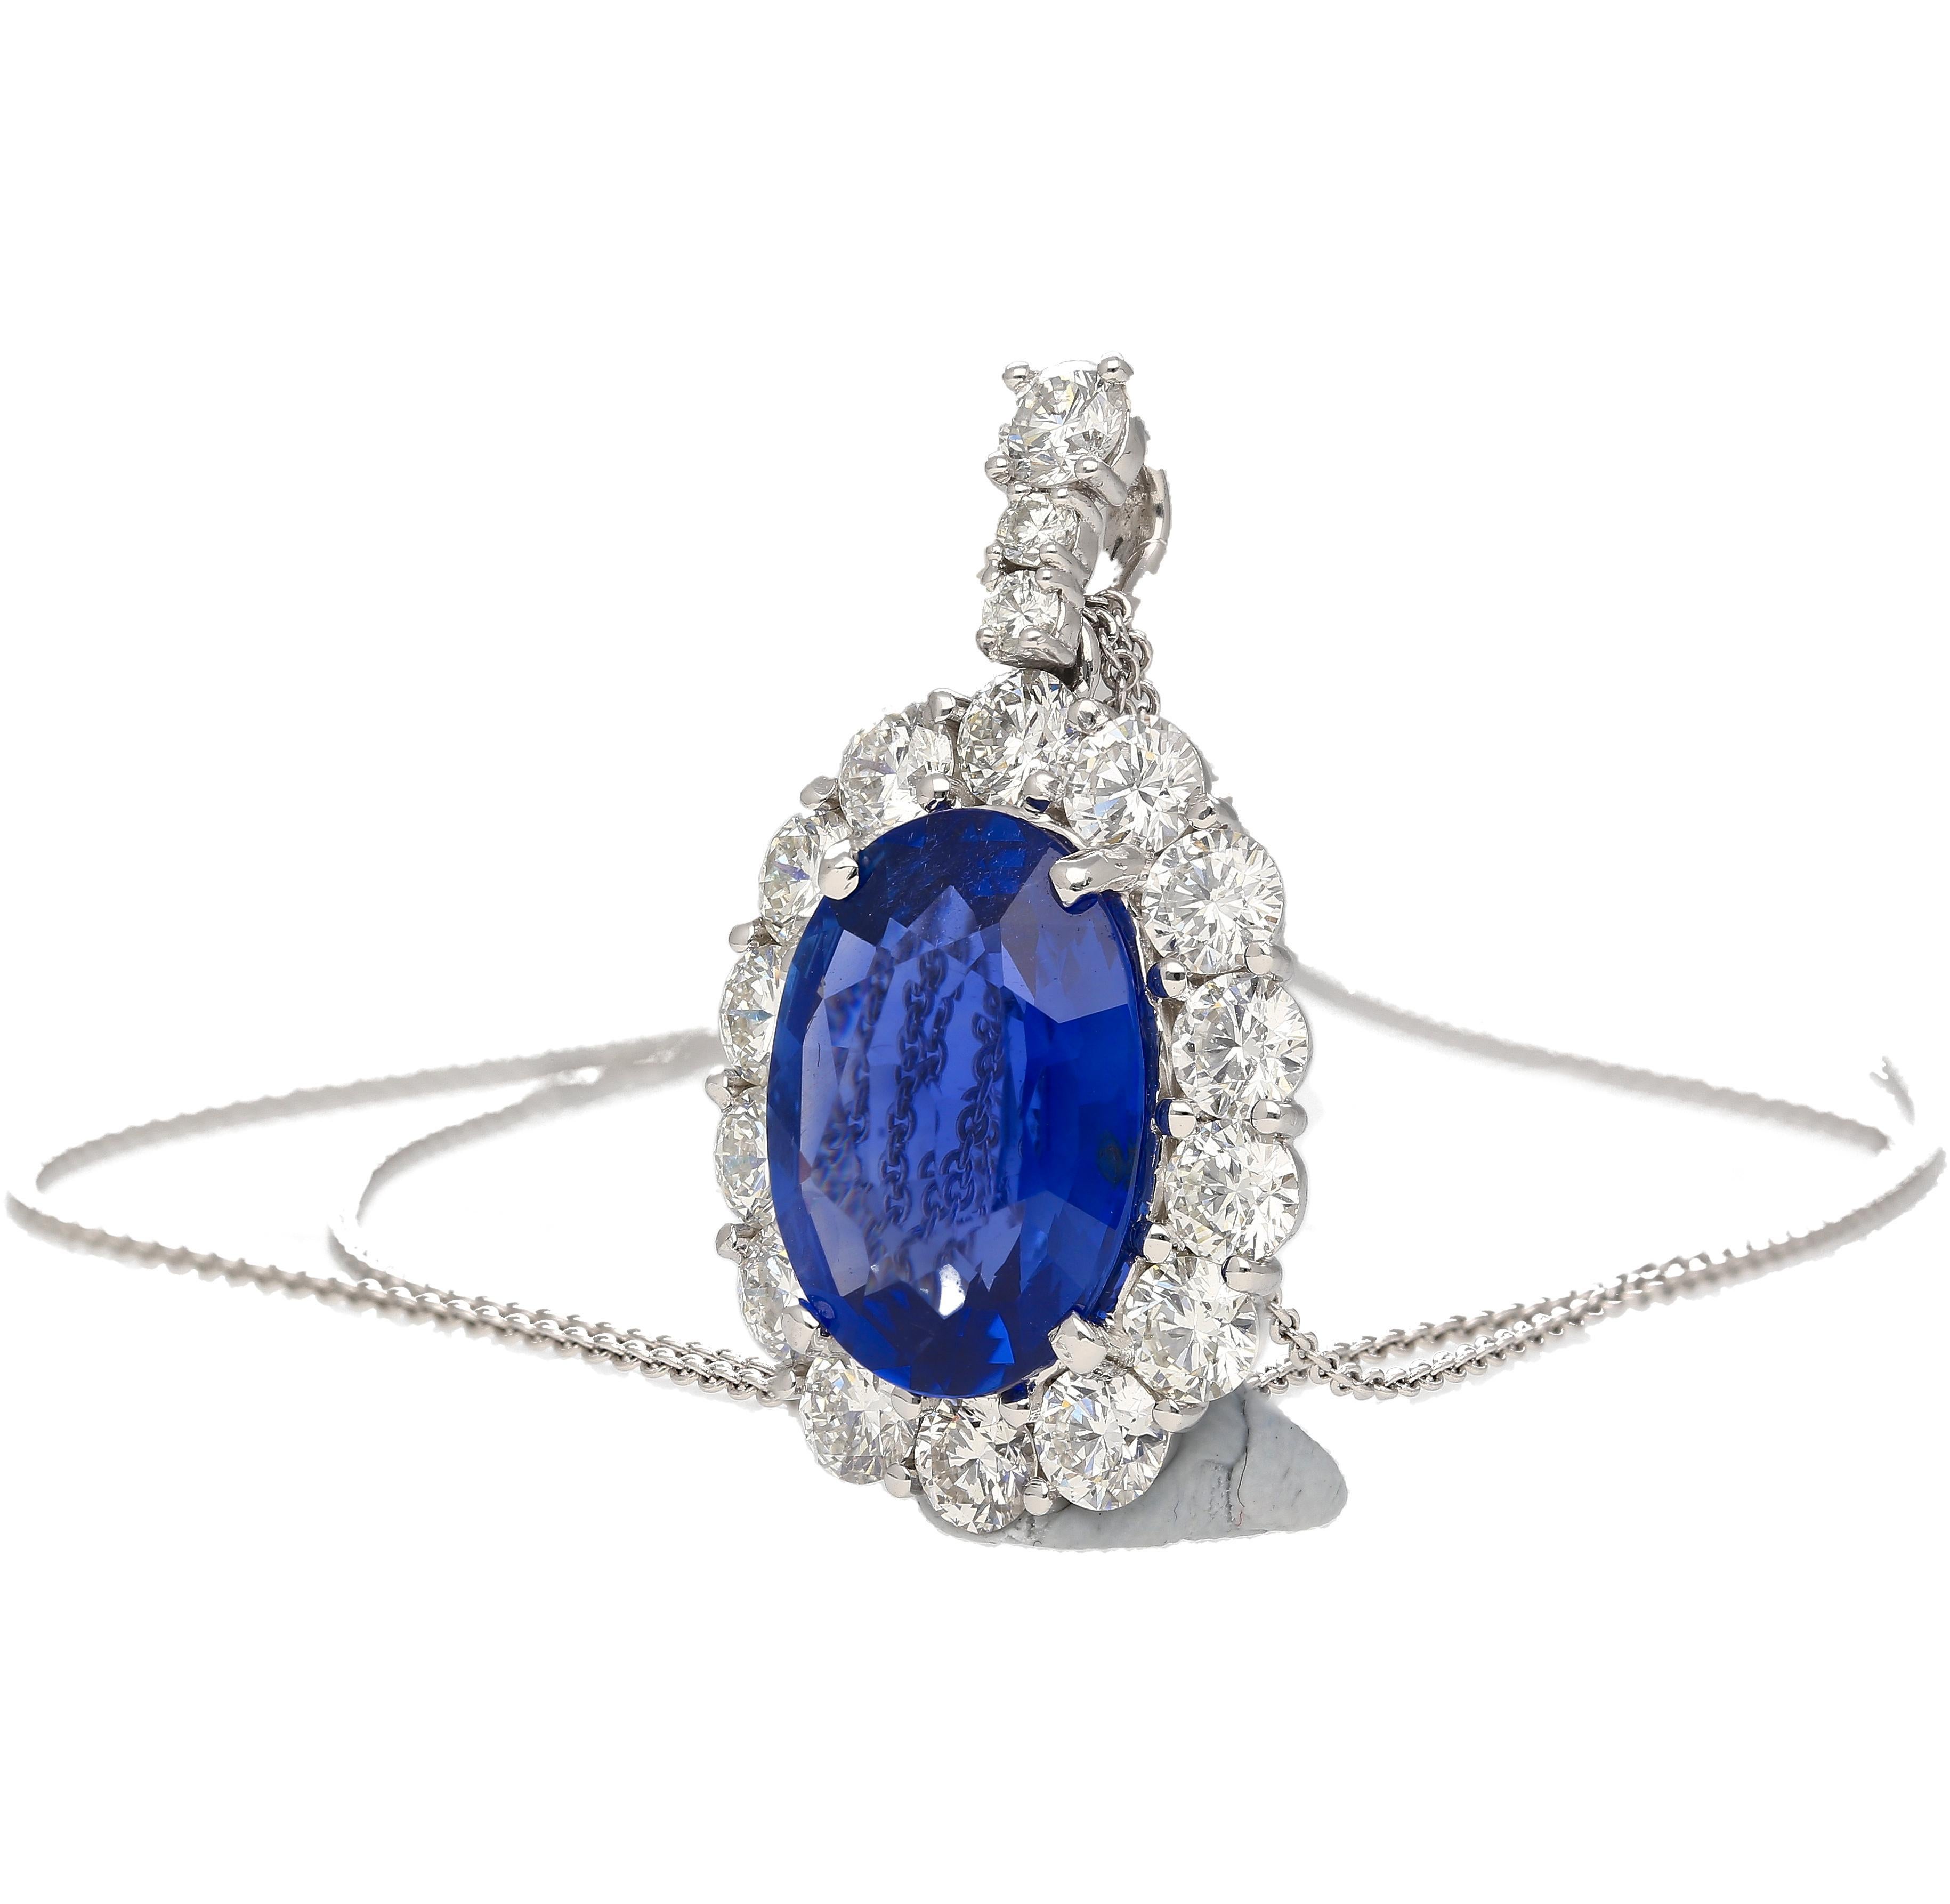 5.83 Carat Oval Cut Sri Lanka Blue Sapphire & Diamond Halo Pendant in Platinum 900. 

This eye-catching necklace features a GRS-certified, oval-cut natural blue sapphire and is secured with a 4-prong setting. The sapphire has no treatment or heat